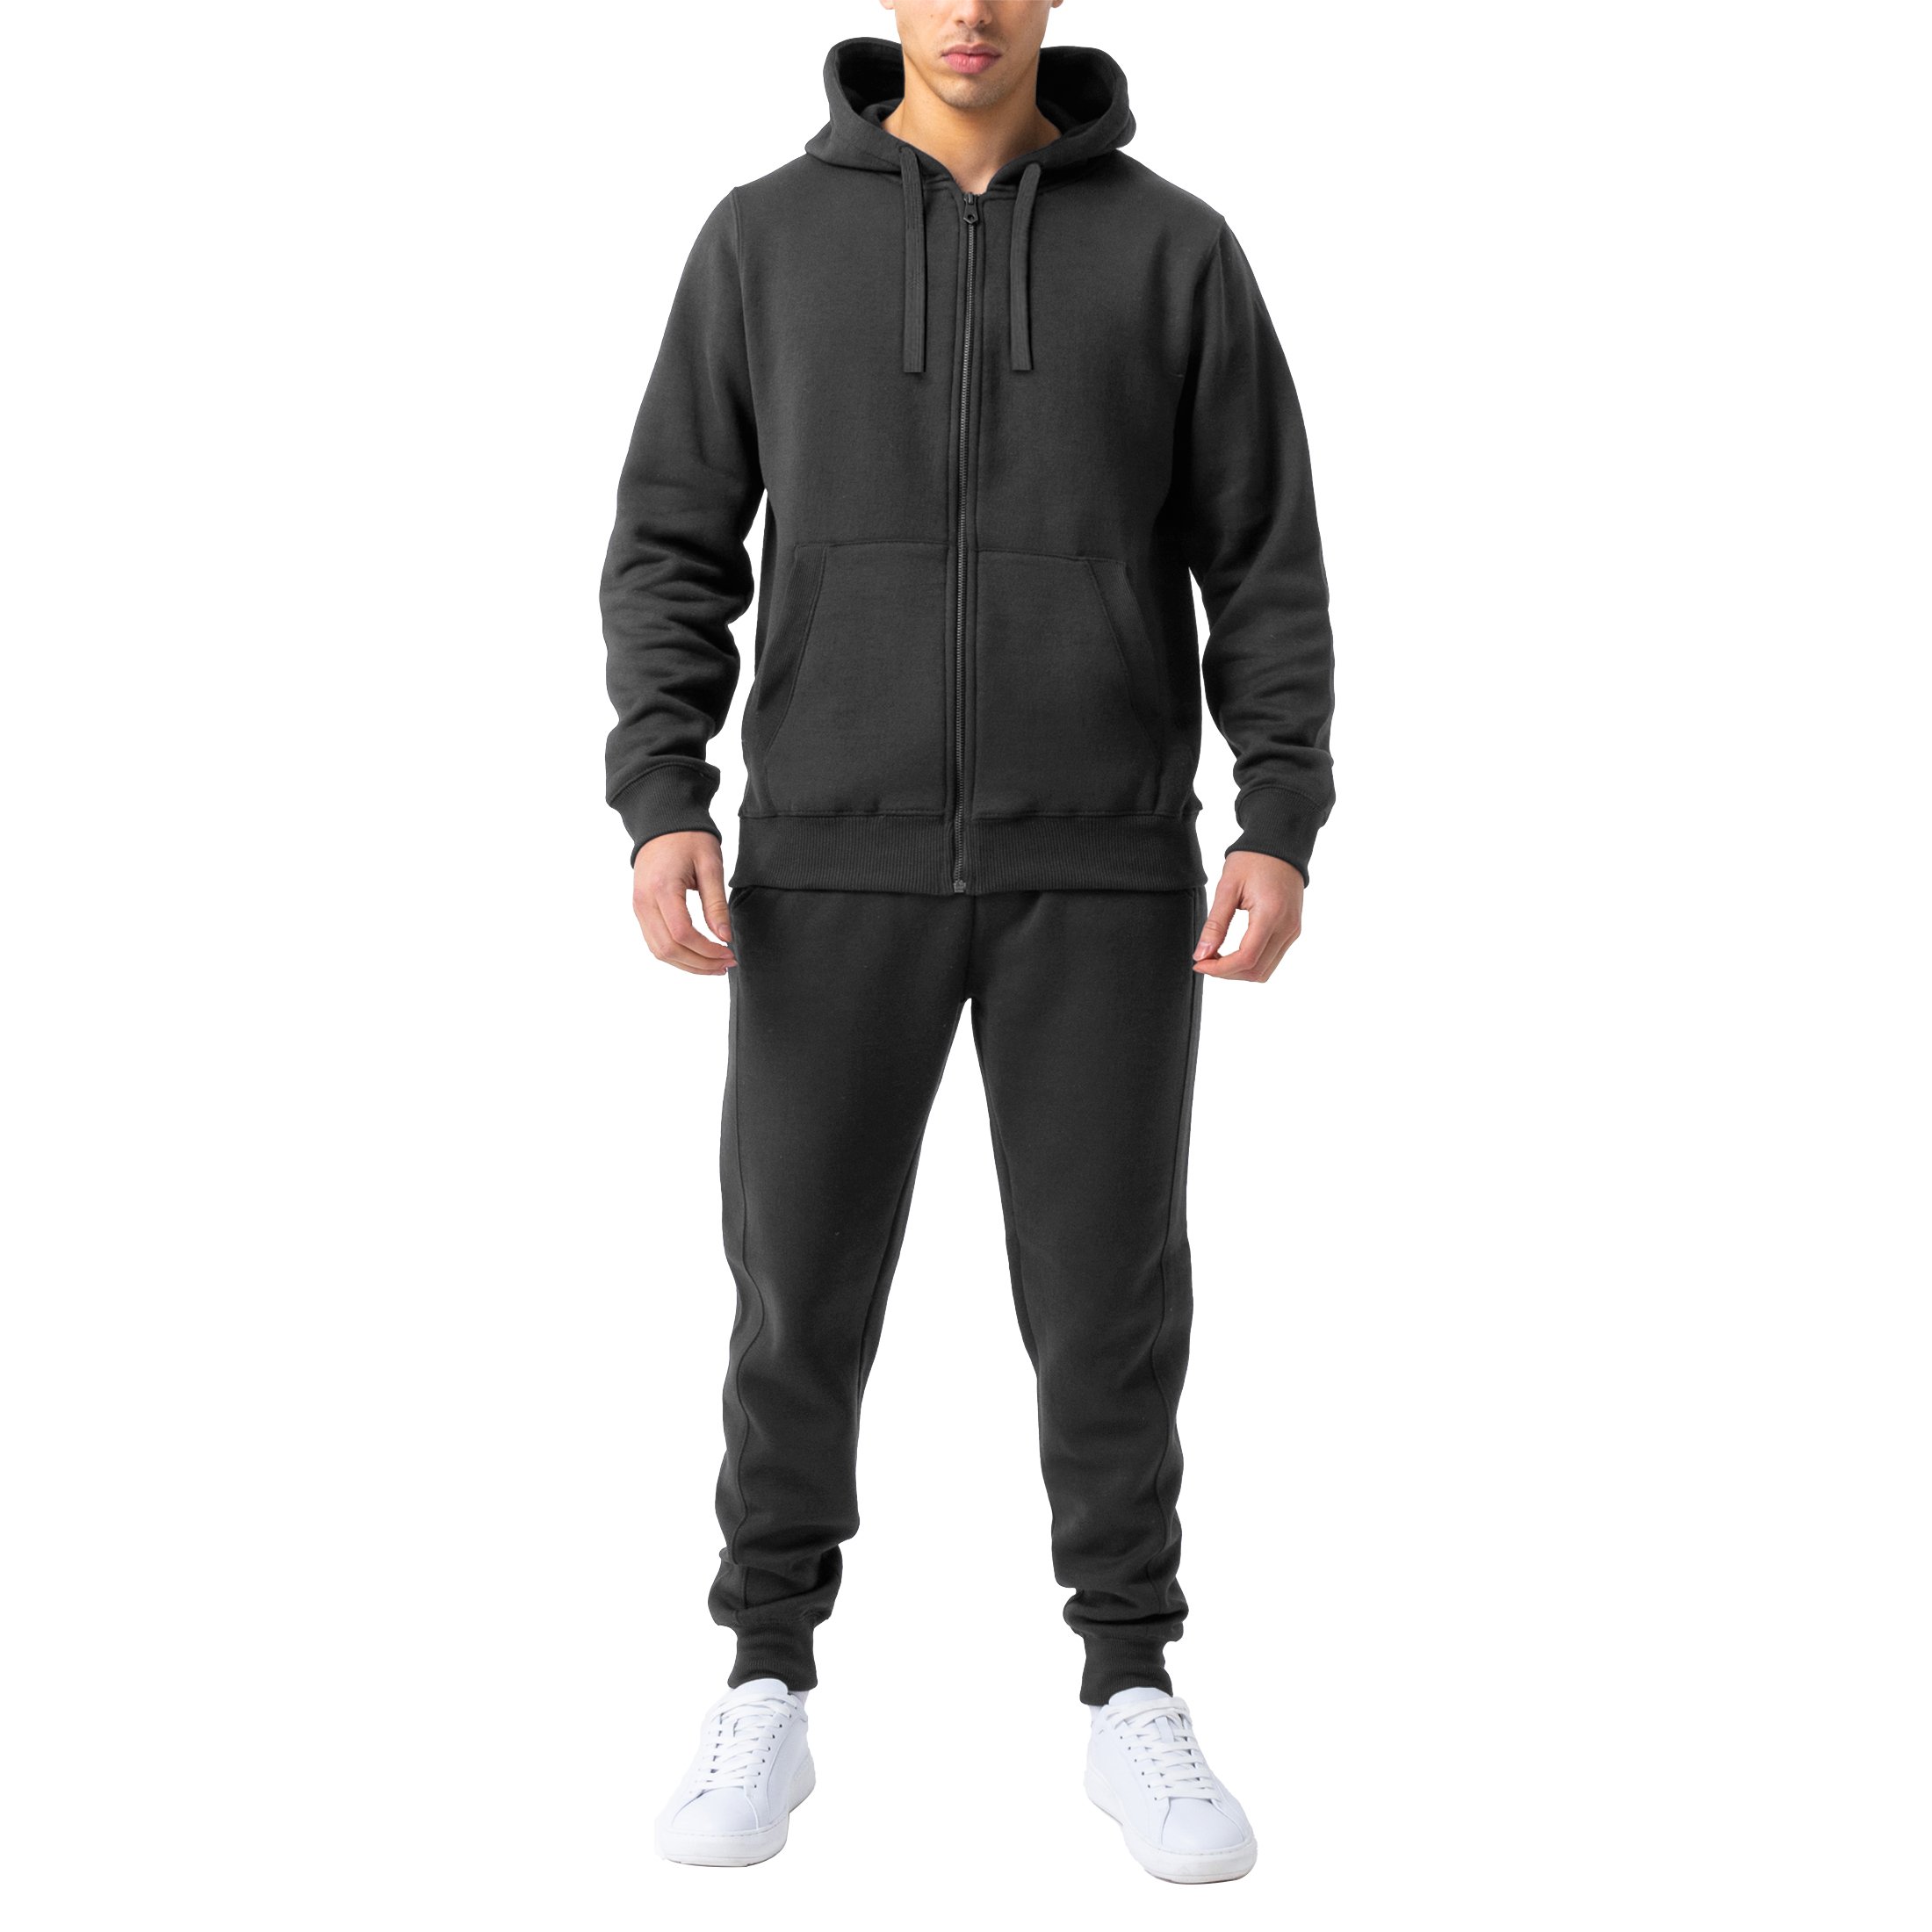 Men's Casual Jogging Athletic Active Full Zip Up Tracksuit - Charcoal, 2X-Large